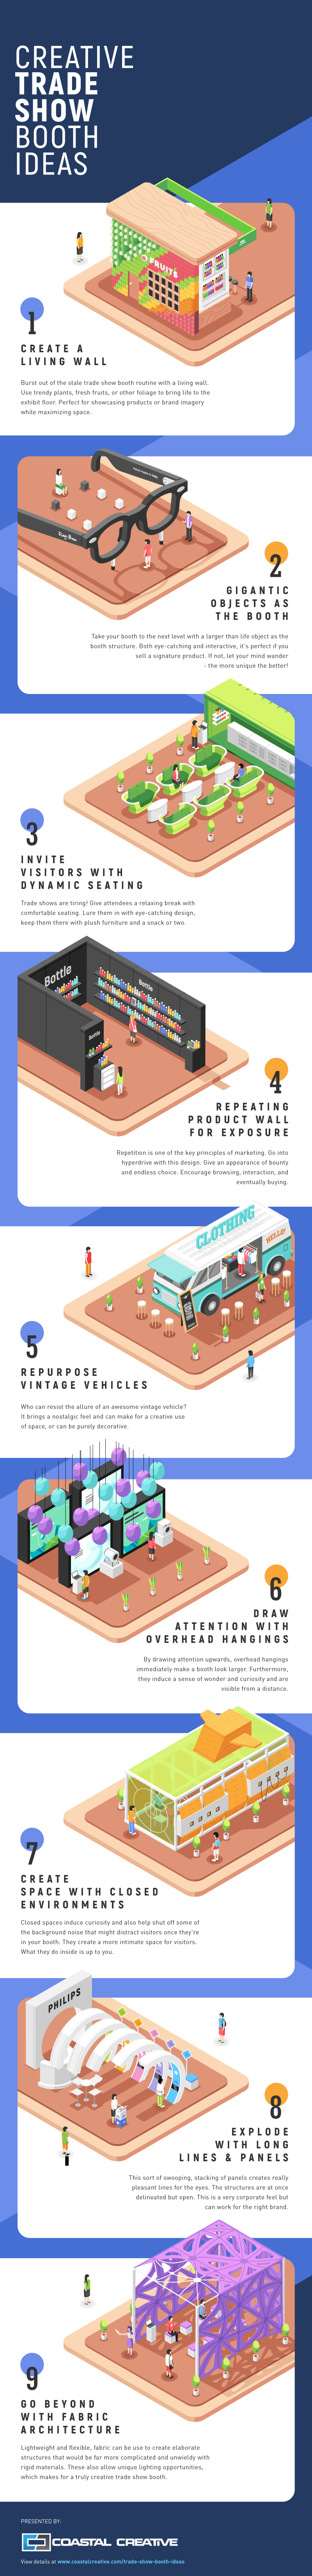 Infographic for Creative Trade Show Booth Ideas